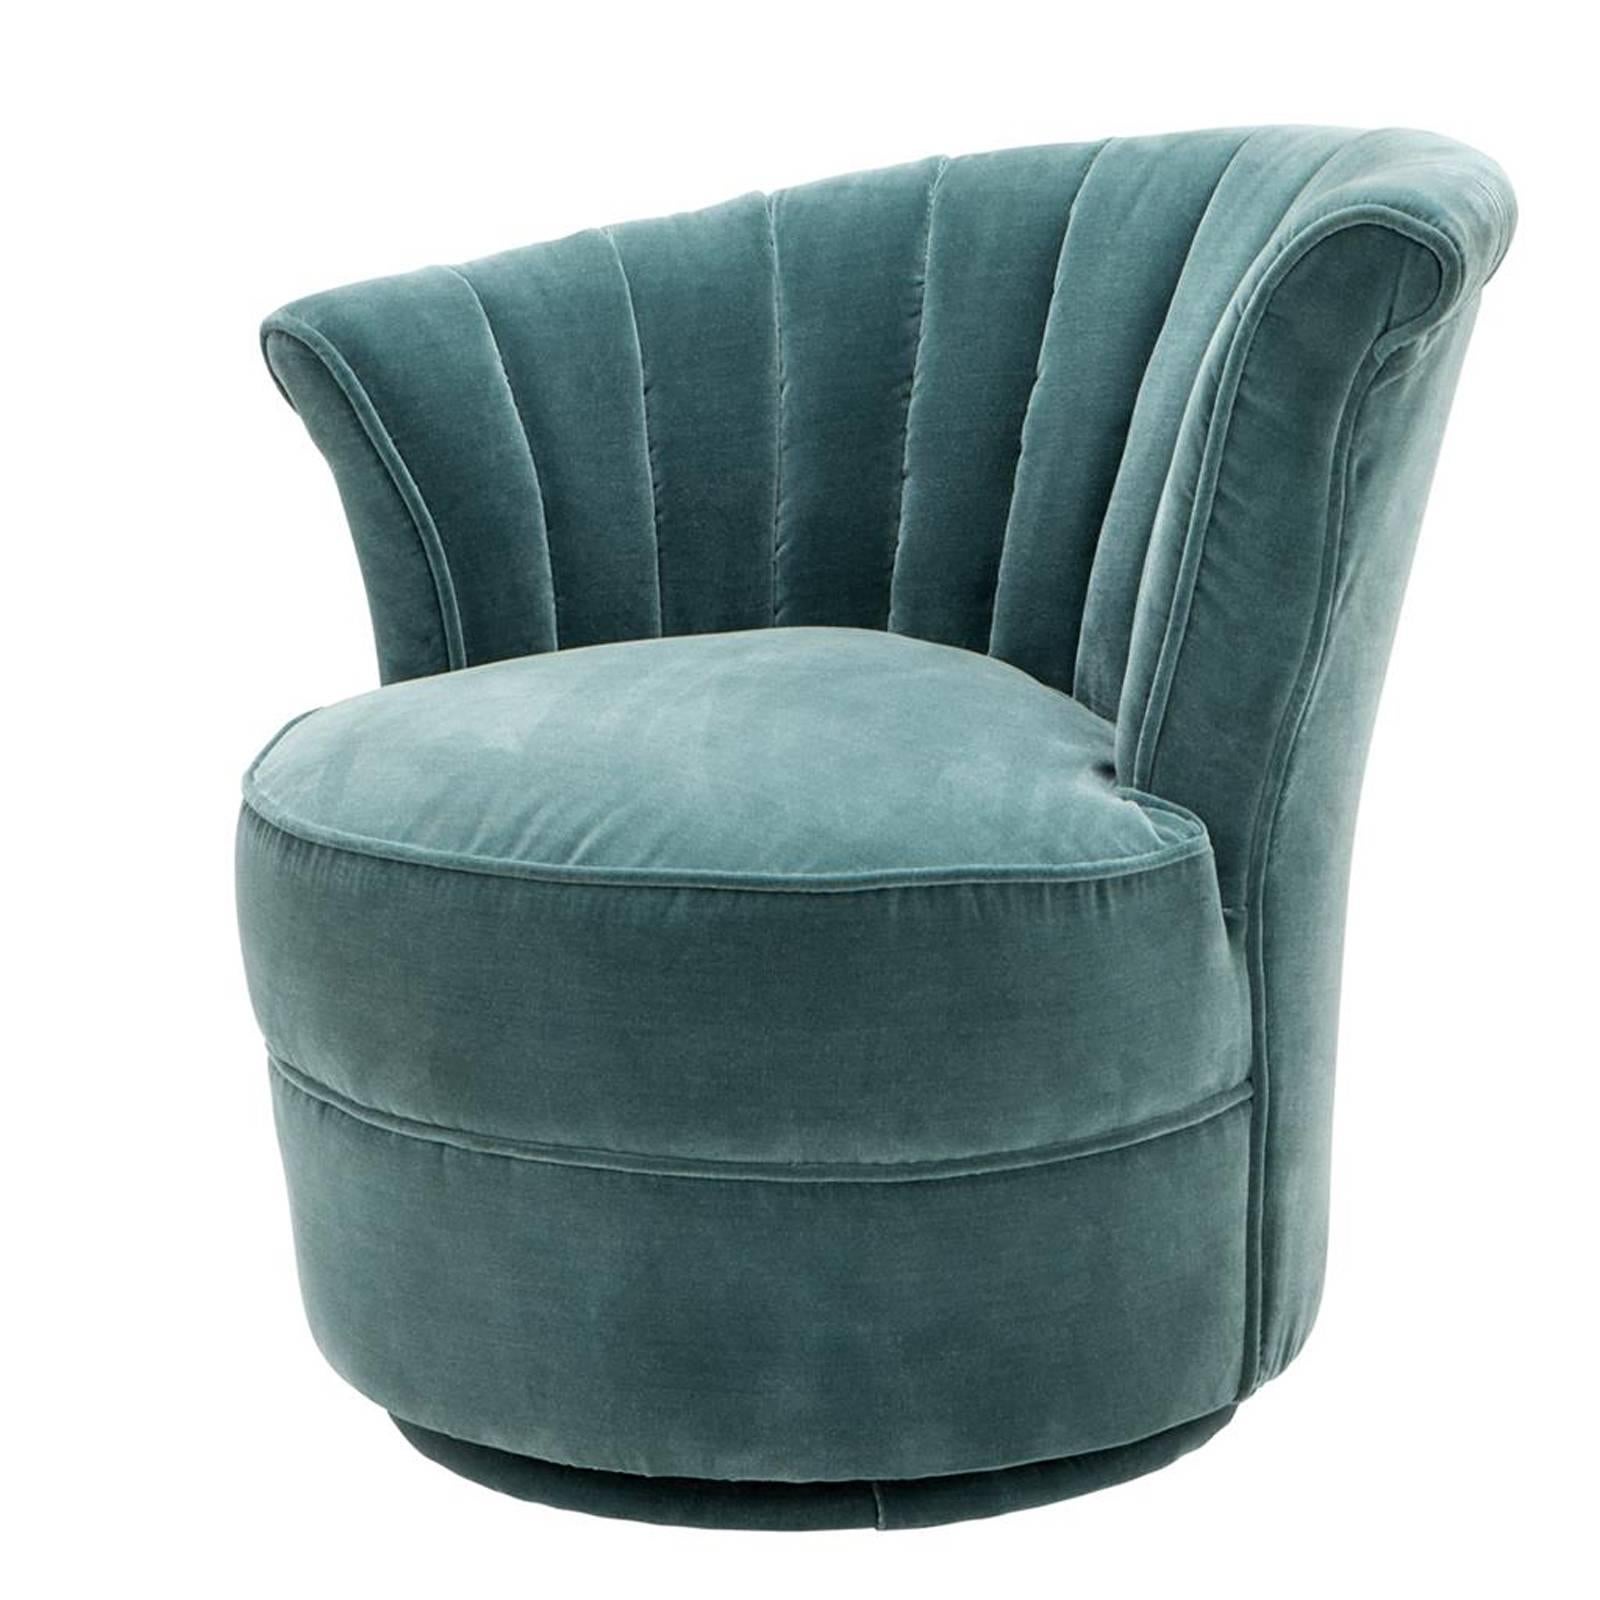 Wing chair left with turquoise velvet fabric
with fire retardant treatment. Structure in 
solid wood. On swivel base.
Also available in black velvet fabric.
Also available in chair right.

 